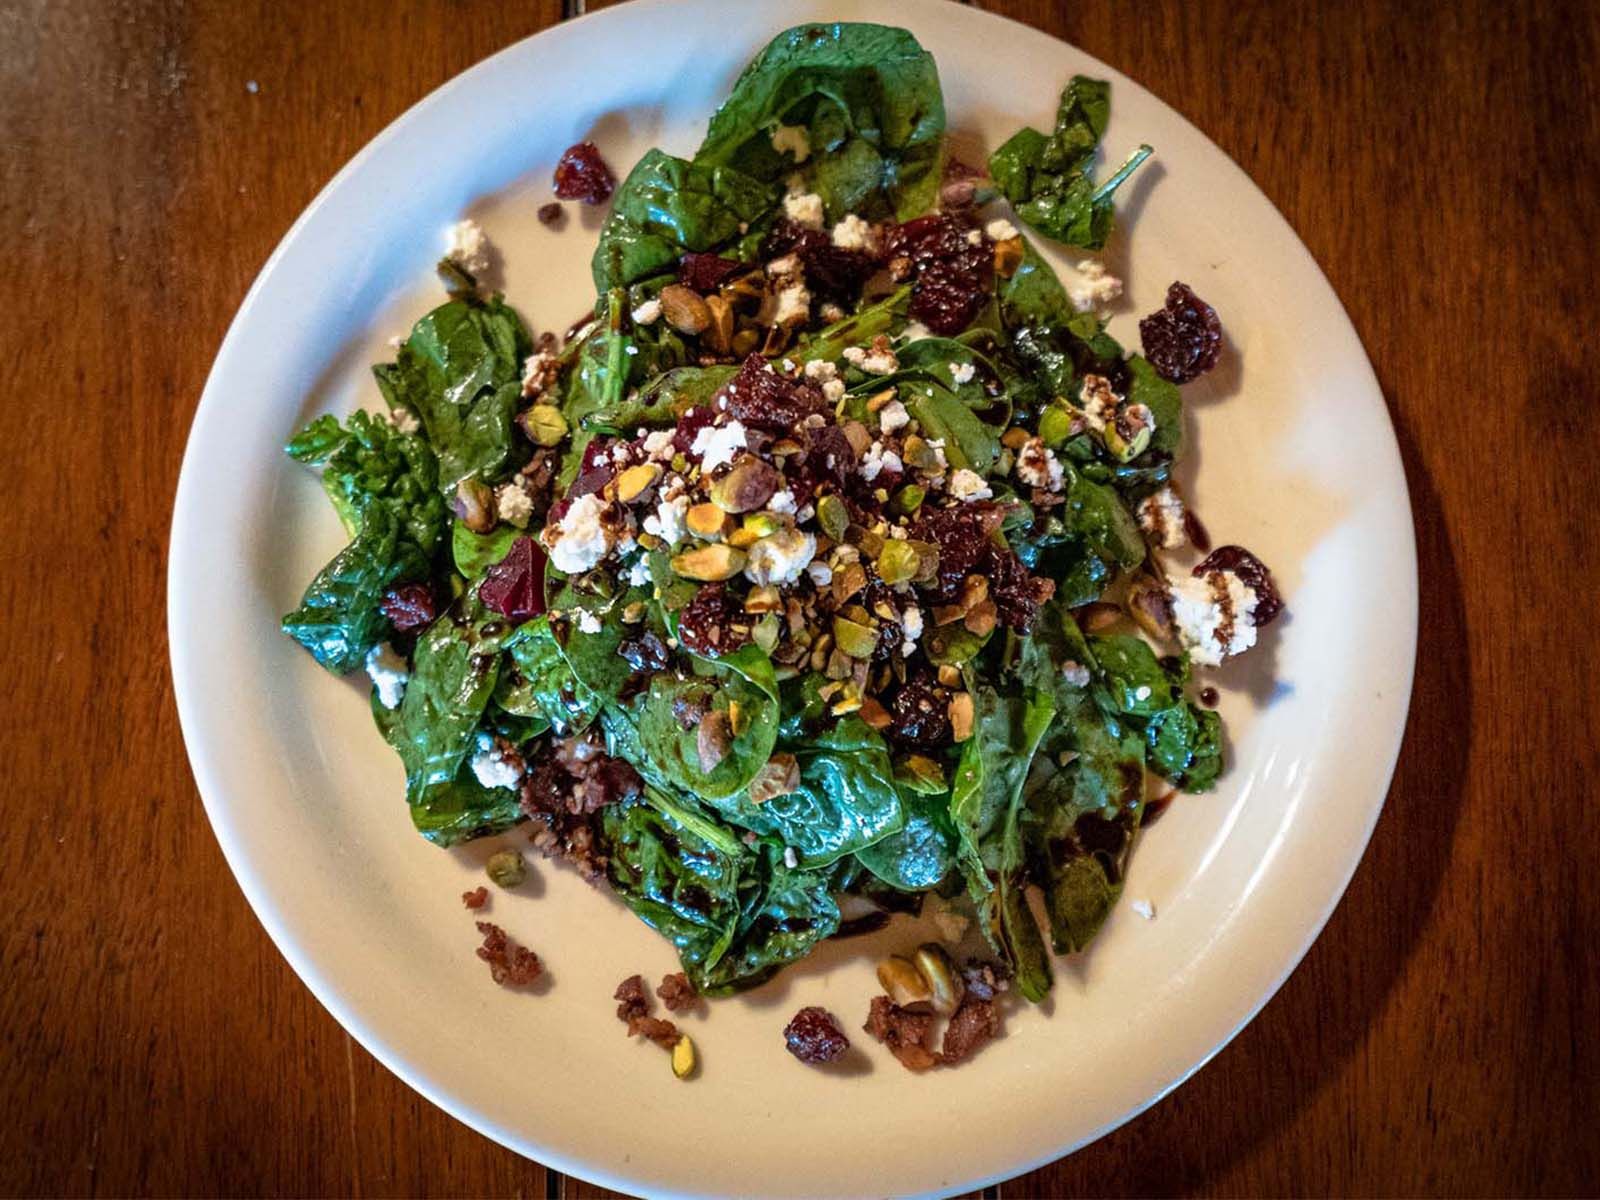 Spinach and kale salad with balsamic reduction glaze 